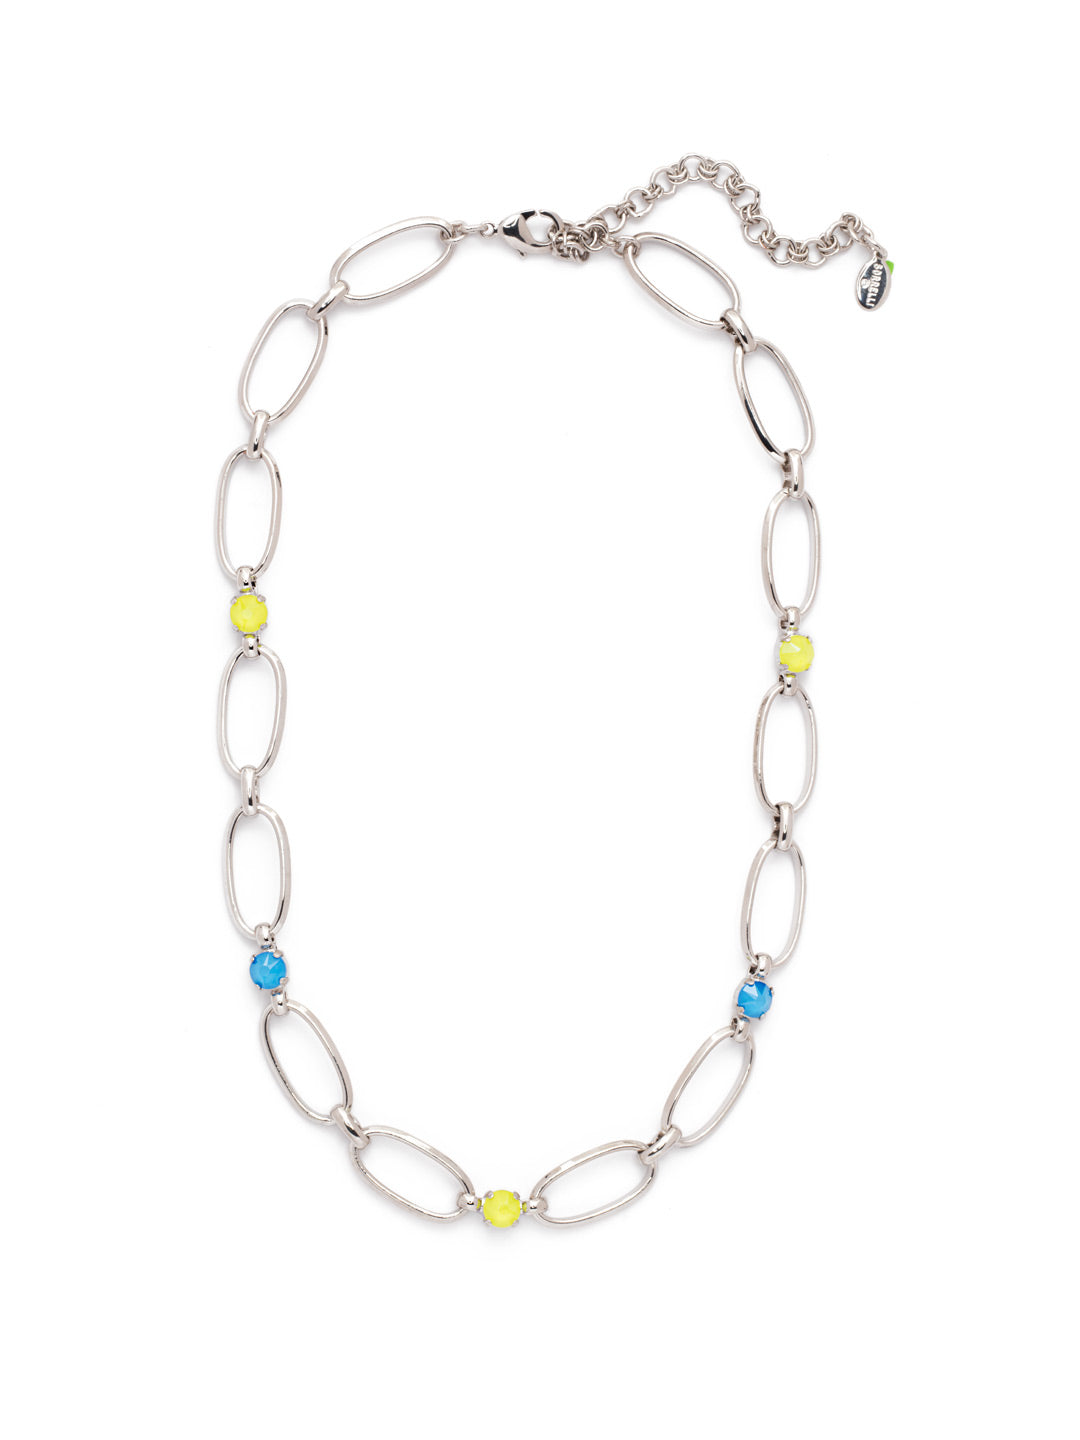 Paige Tennis Necklace - NET3PDBPY - <p>The Paige Tennis Necklace is open, airy and sparkly, too. Metallic links are joined with round Sorrelli crystals that shine bright. From Sorrelli's Blue Poppy collection in our Palladium finish.</p>